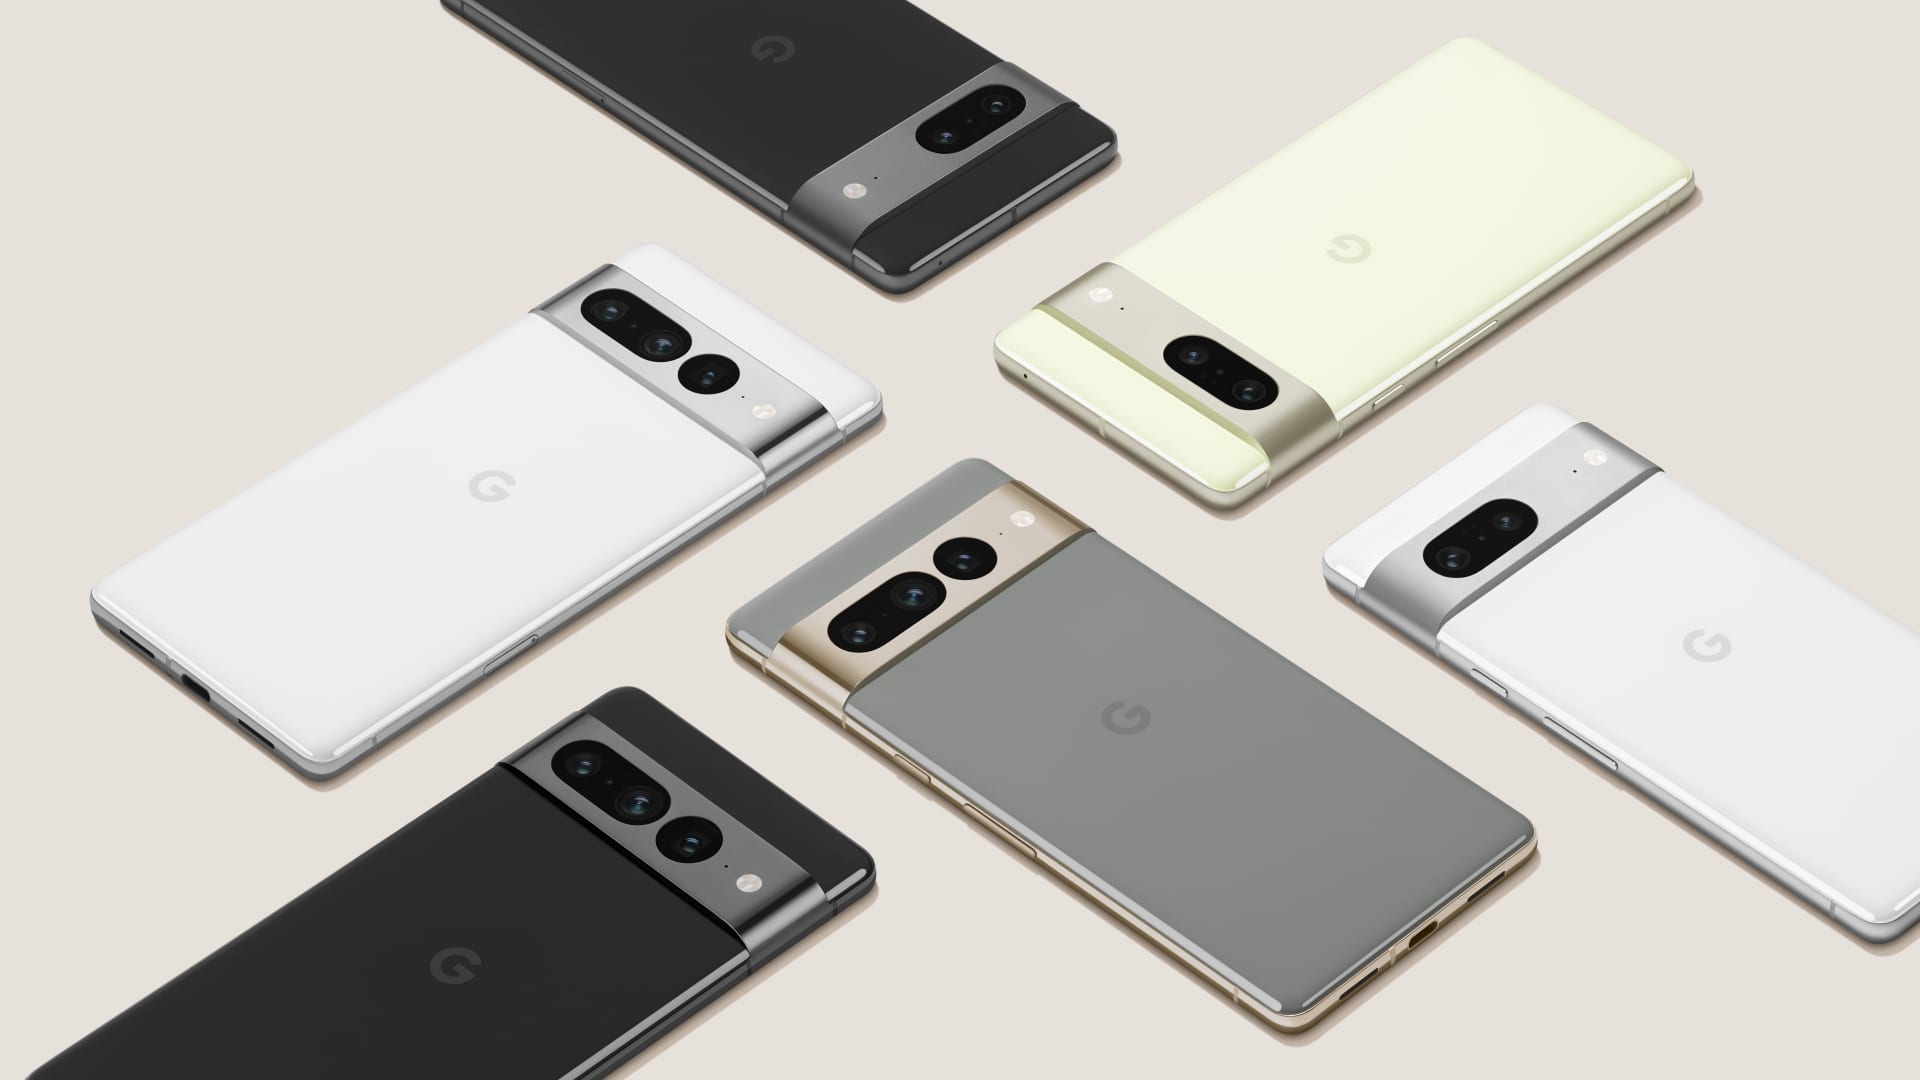 Google announces event for Oct. 4, where new Pixel phone and smartwatch expected